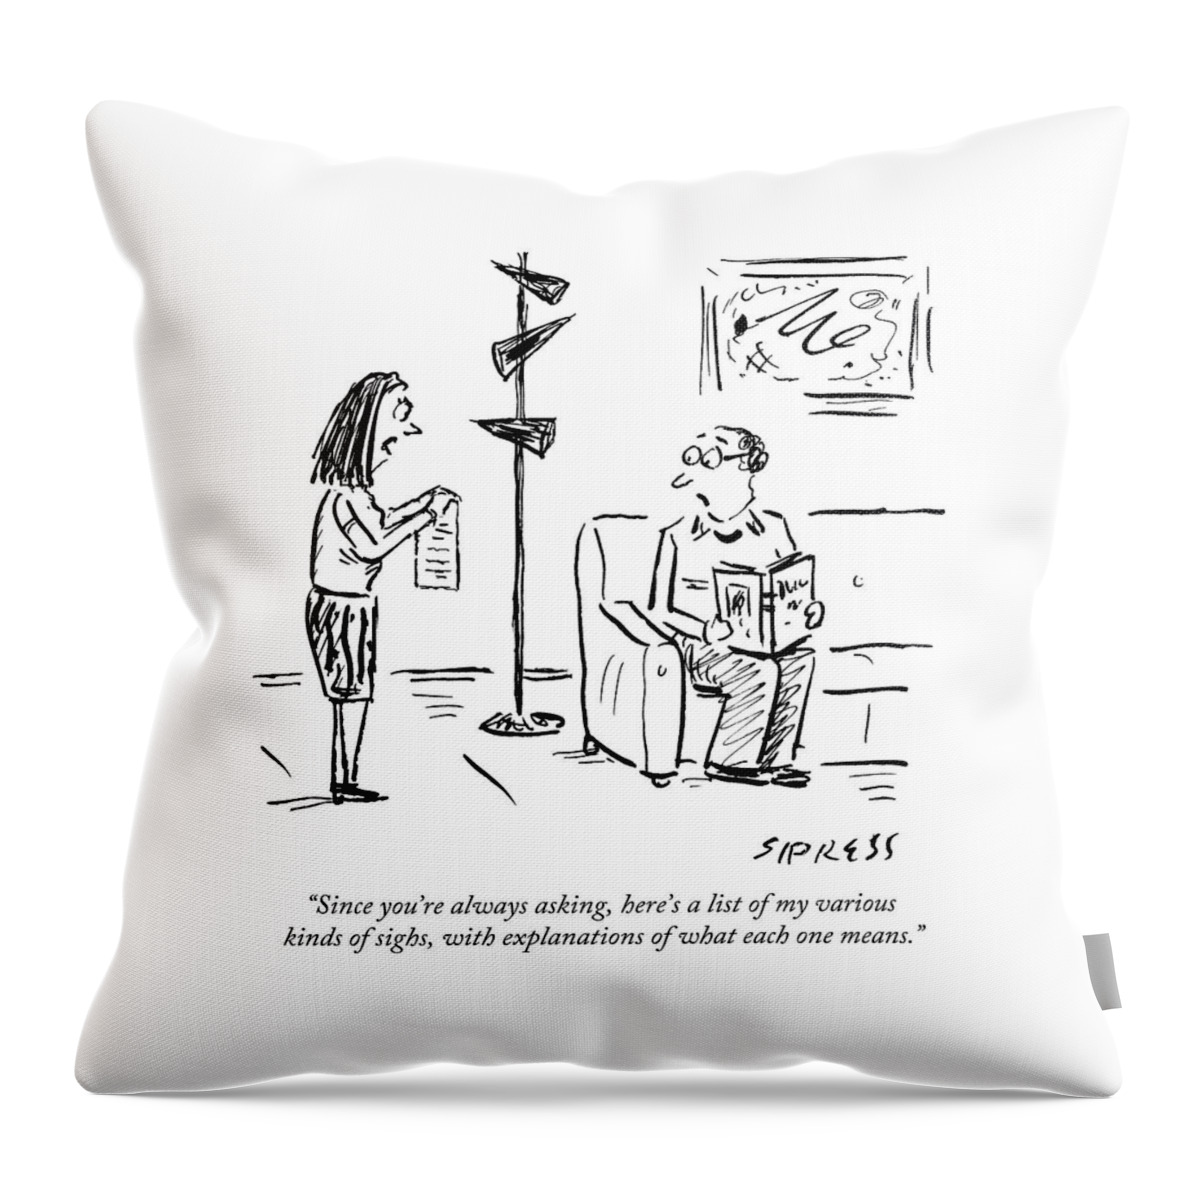 Since You're Always Asking Throw Pillow